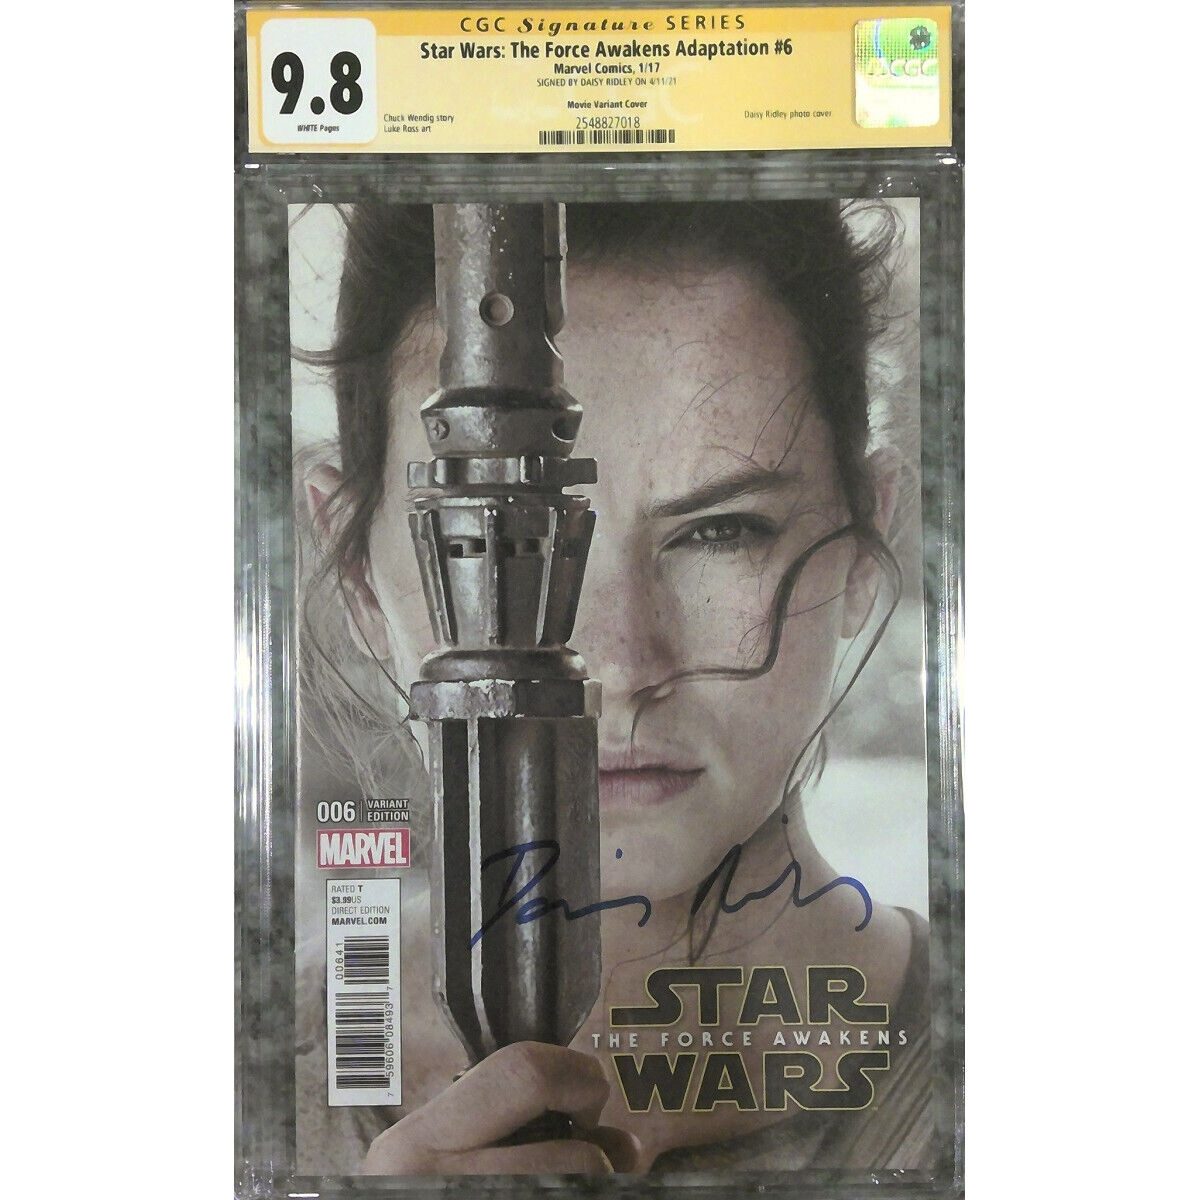 Star Wars: Force Awakens #6 photo cover__CGC 9.8 SS__Signed by Daisy Ridley